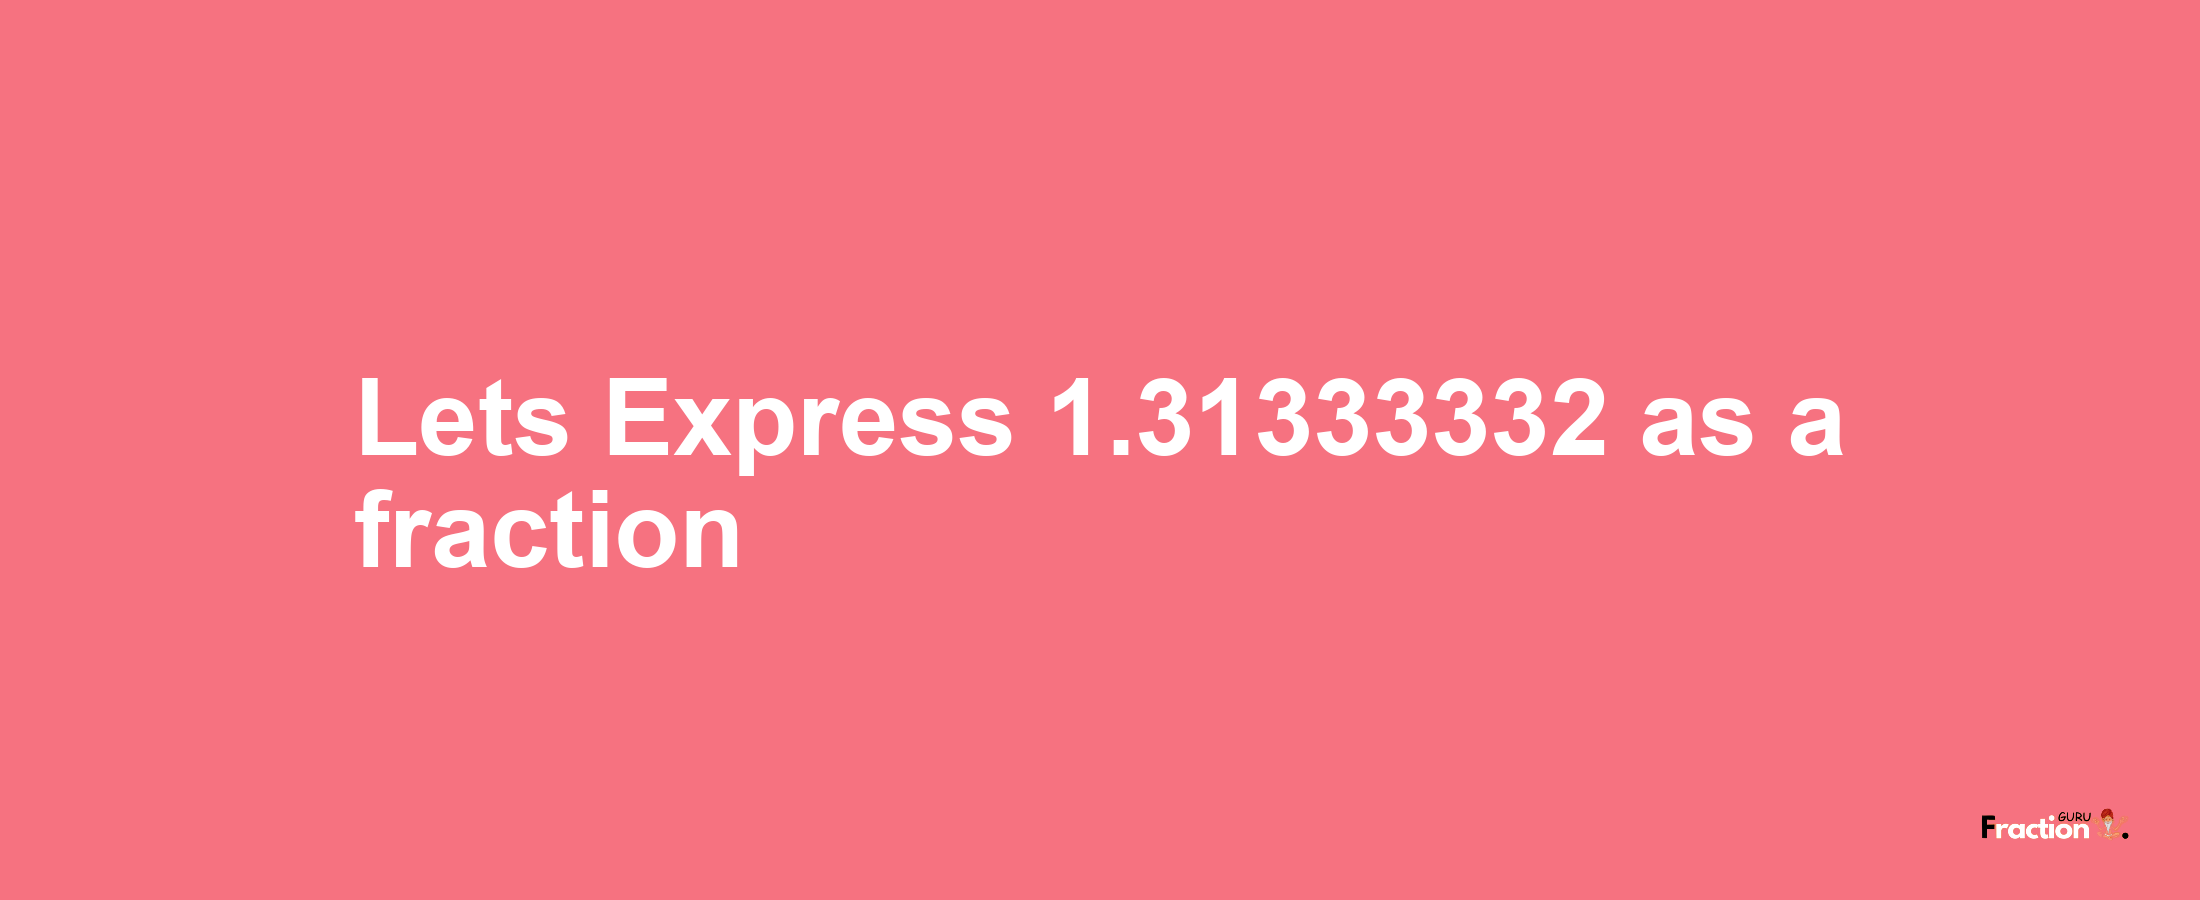 Lets Express 1.31333332 as afraction